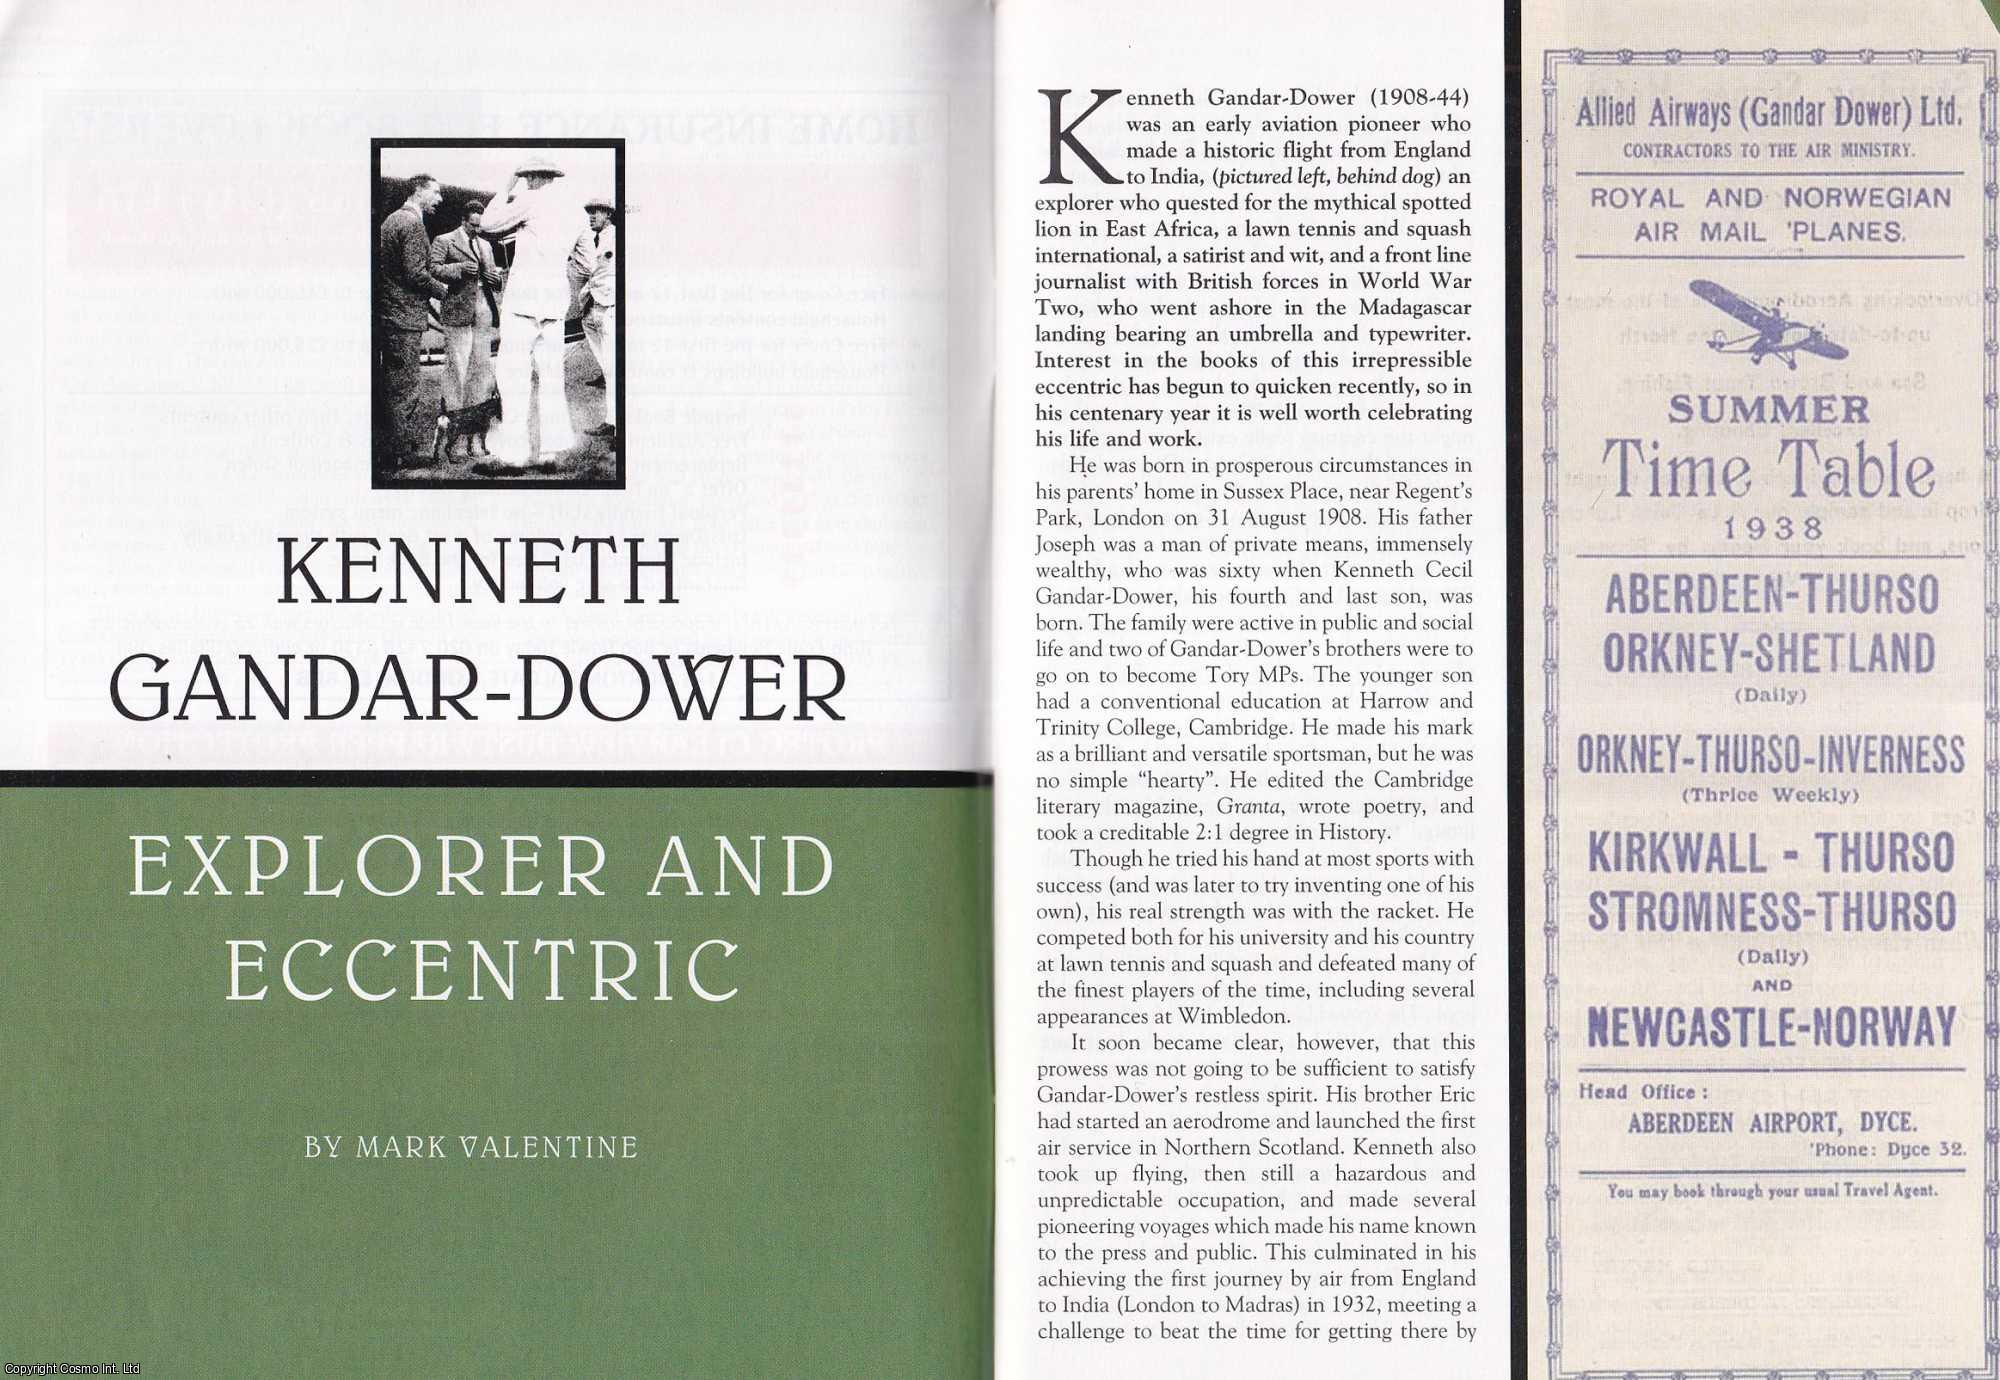 Mark Valentine - Kenneth Gandar-Dower. Explorer and Eccentric. This is an original article separated from an issue of The Book & Magazine Collector publication.